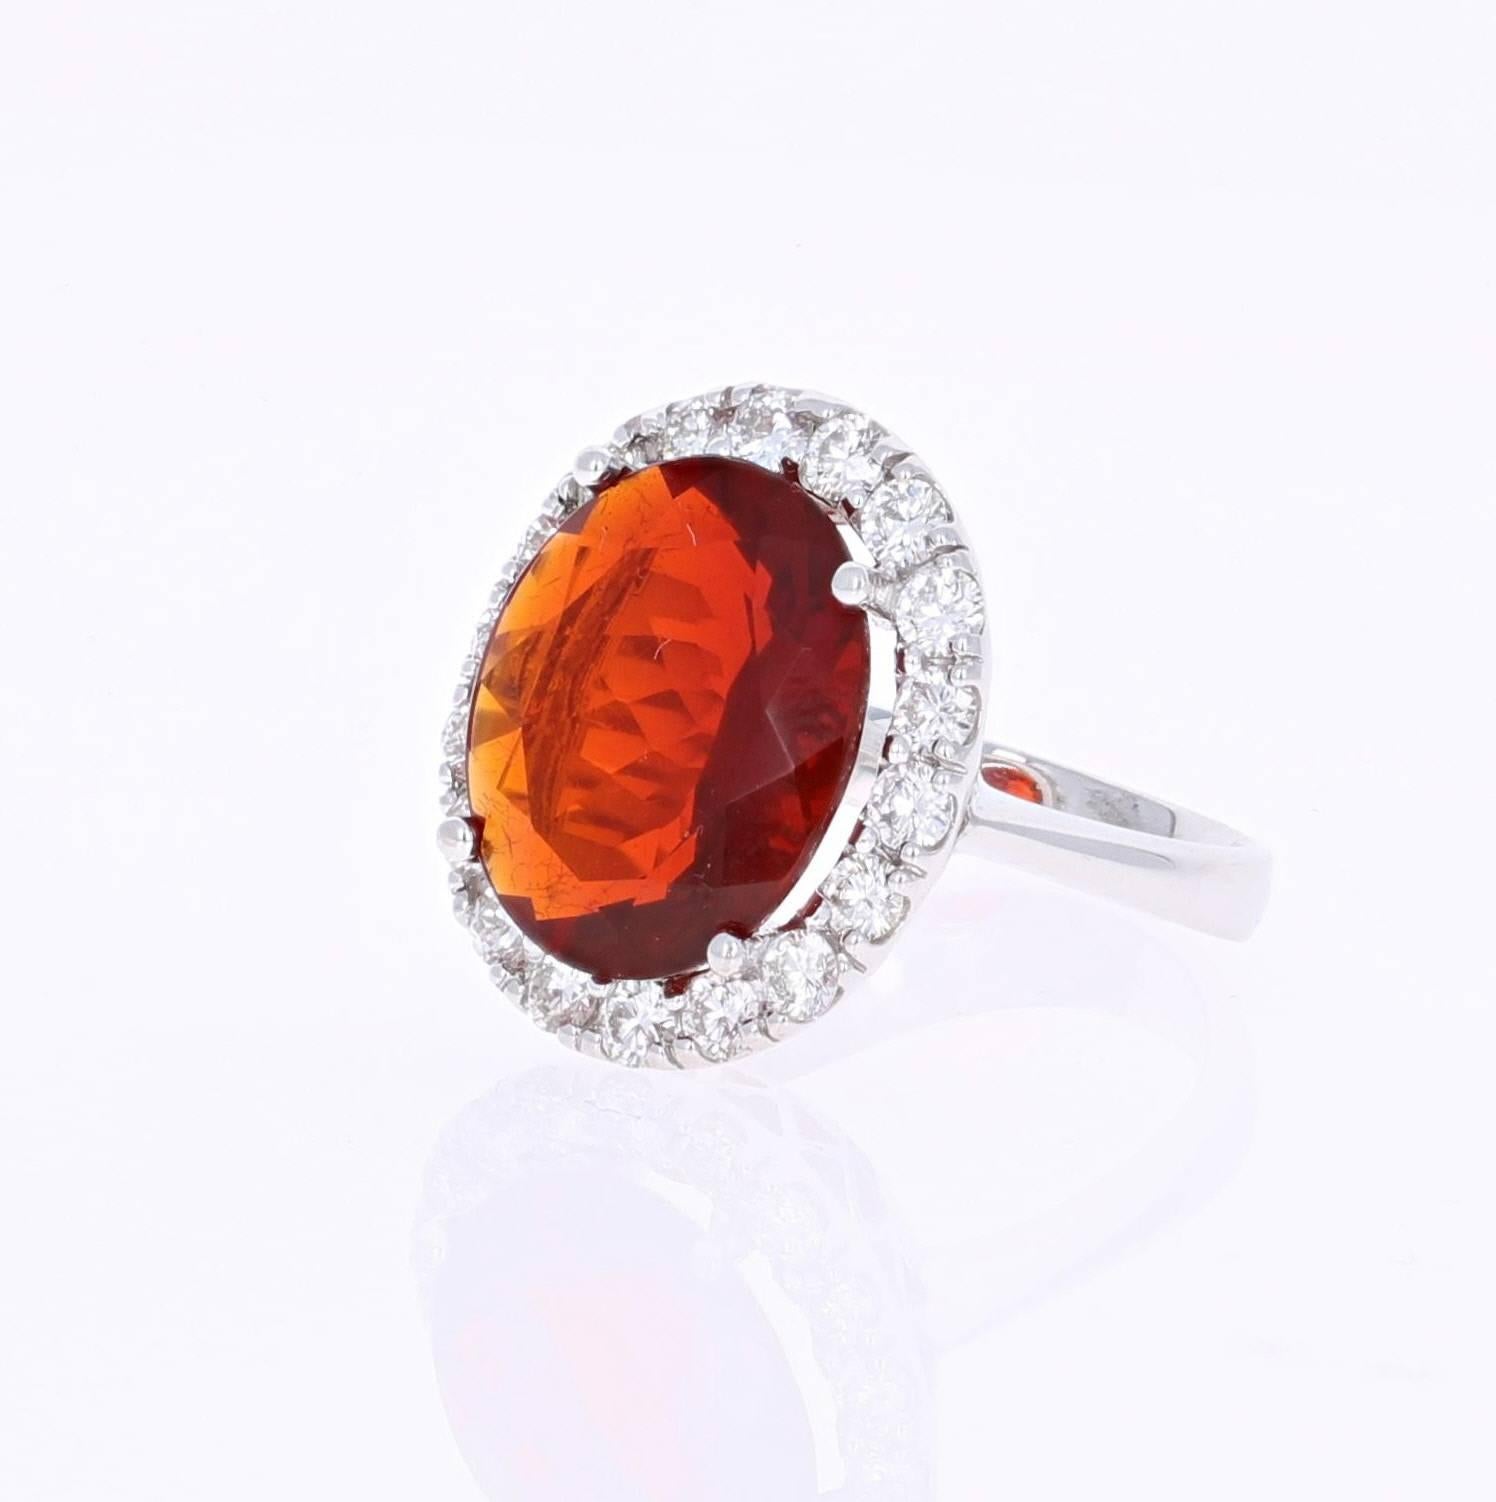 Beautiful Fire Opal and Diamond Ring. This ring has an Oval Cut 5.71 carat Fire Opal in the center of the ring and is surrounded by a halo of 18 Round Cut Diamonds that weigh a total of 1.15 carat (Clarity: VS2, Color: H).  The total carat weight of